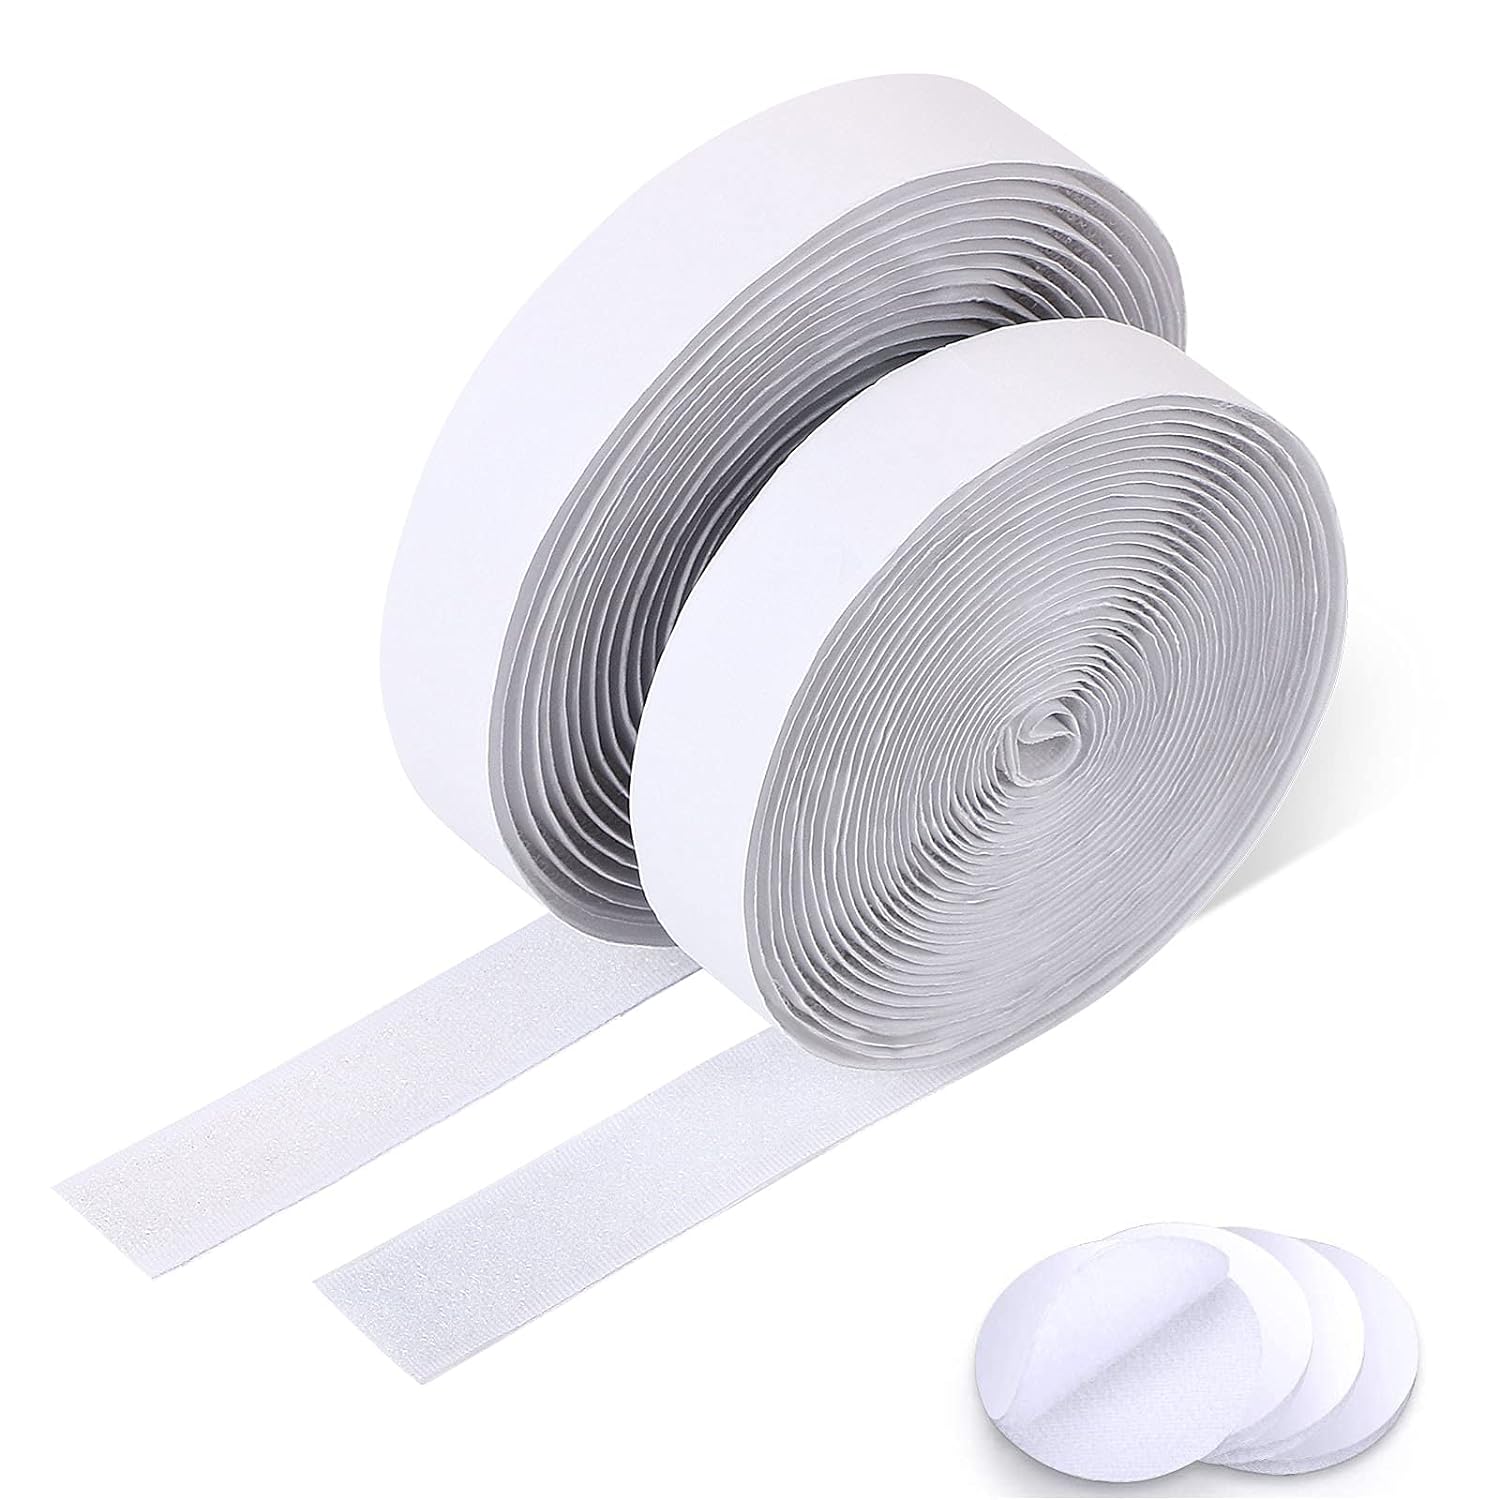 RHAFAYRE 8M Self Adhesive Velcro Strips Sticky Tapes Strips